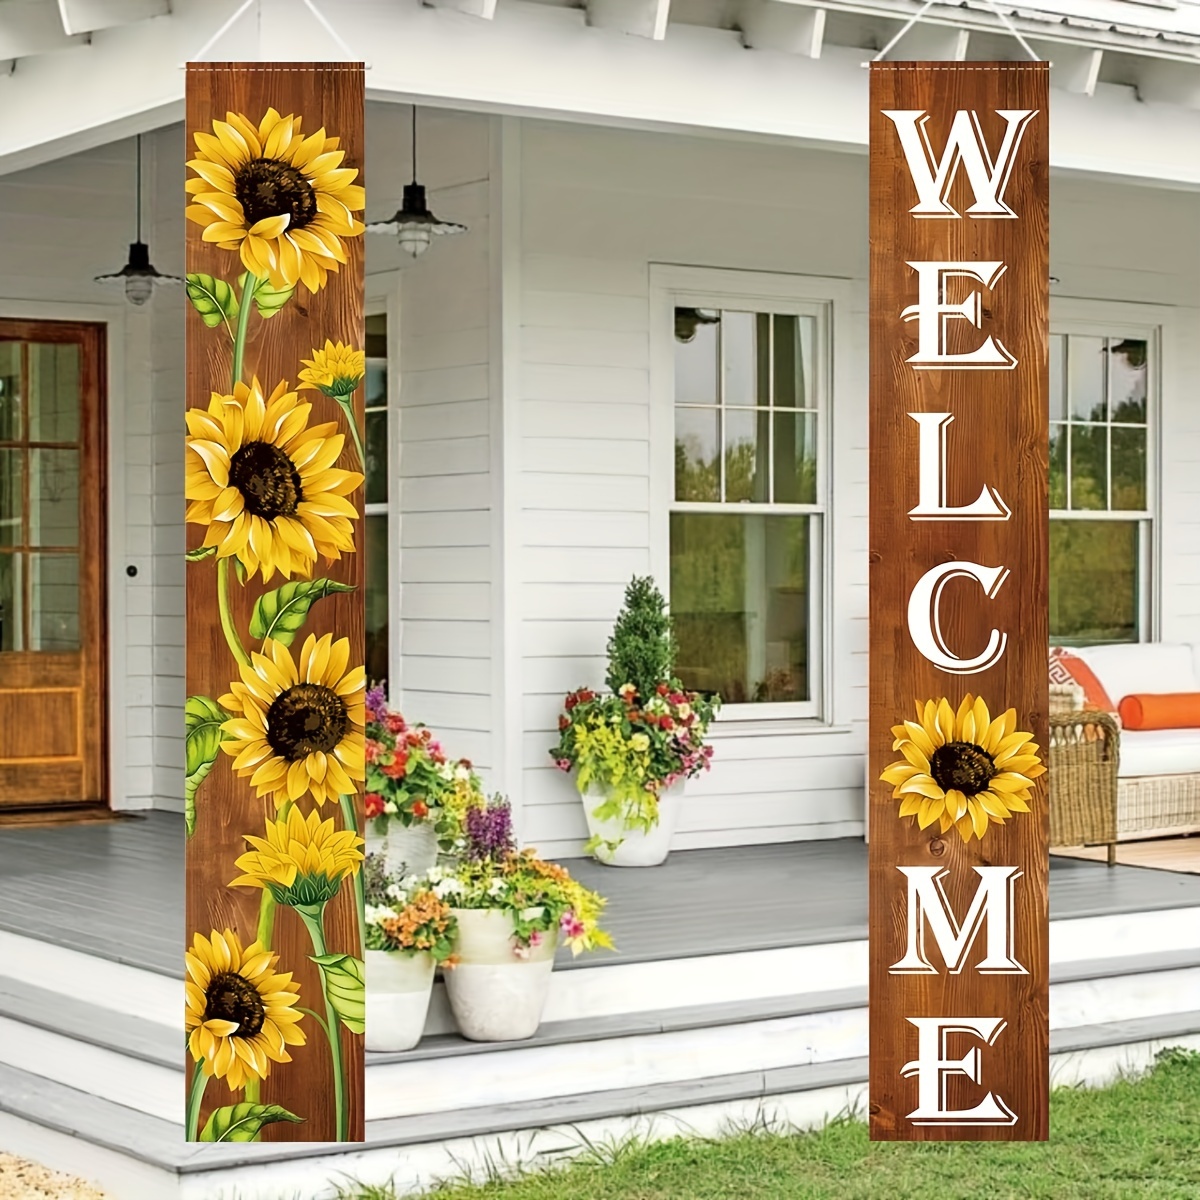 

2pc Sunflower Welcome Polyester Banners - No Electricity Needed - Spring/summer Porch Flags For Front Door, Garden, Home, Yard, Thanksgiving, Sunflower Party Decorations - 12x70.8in